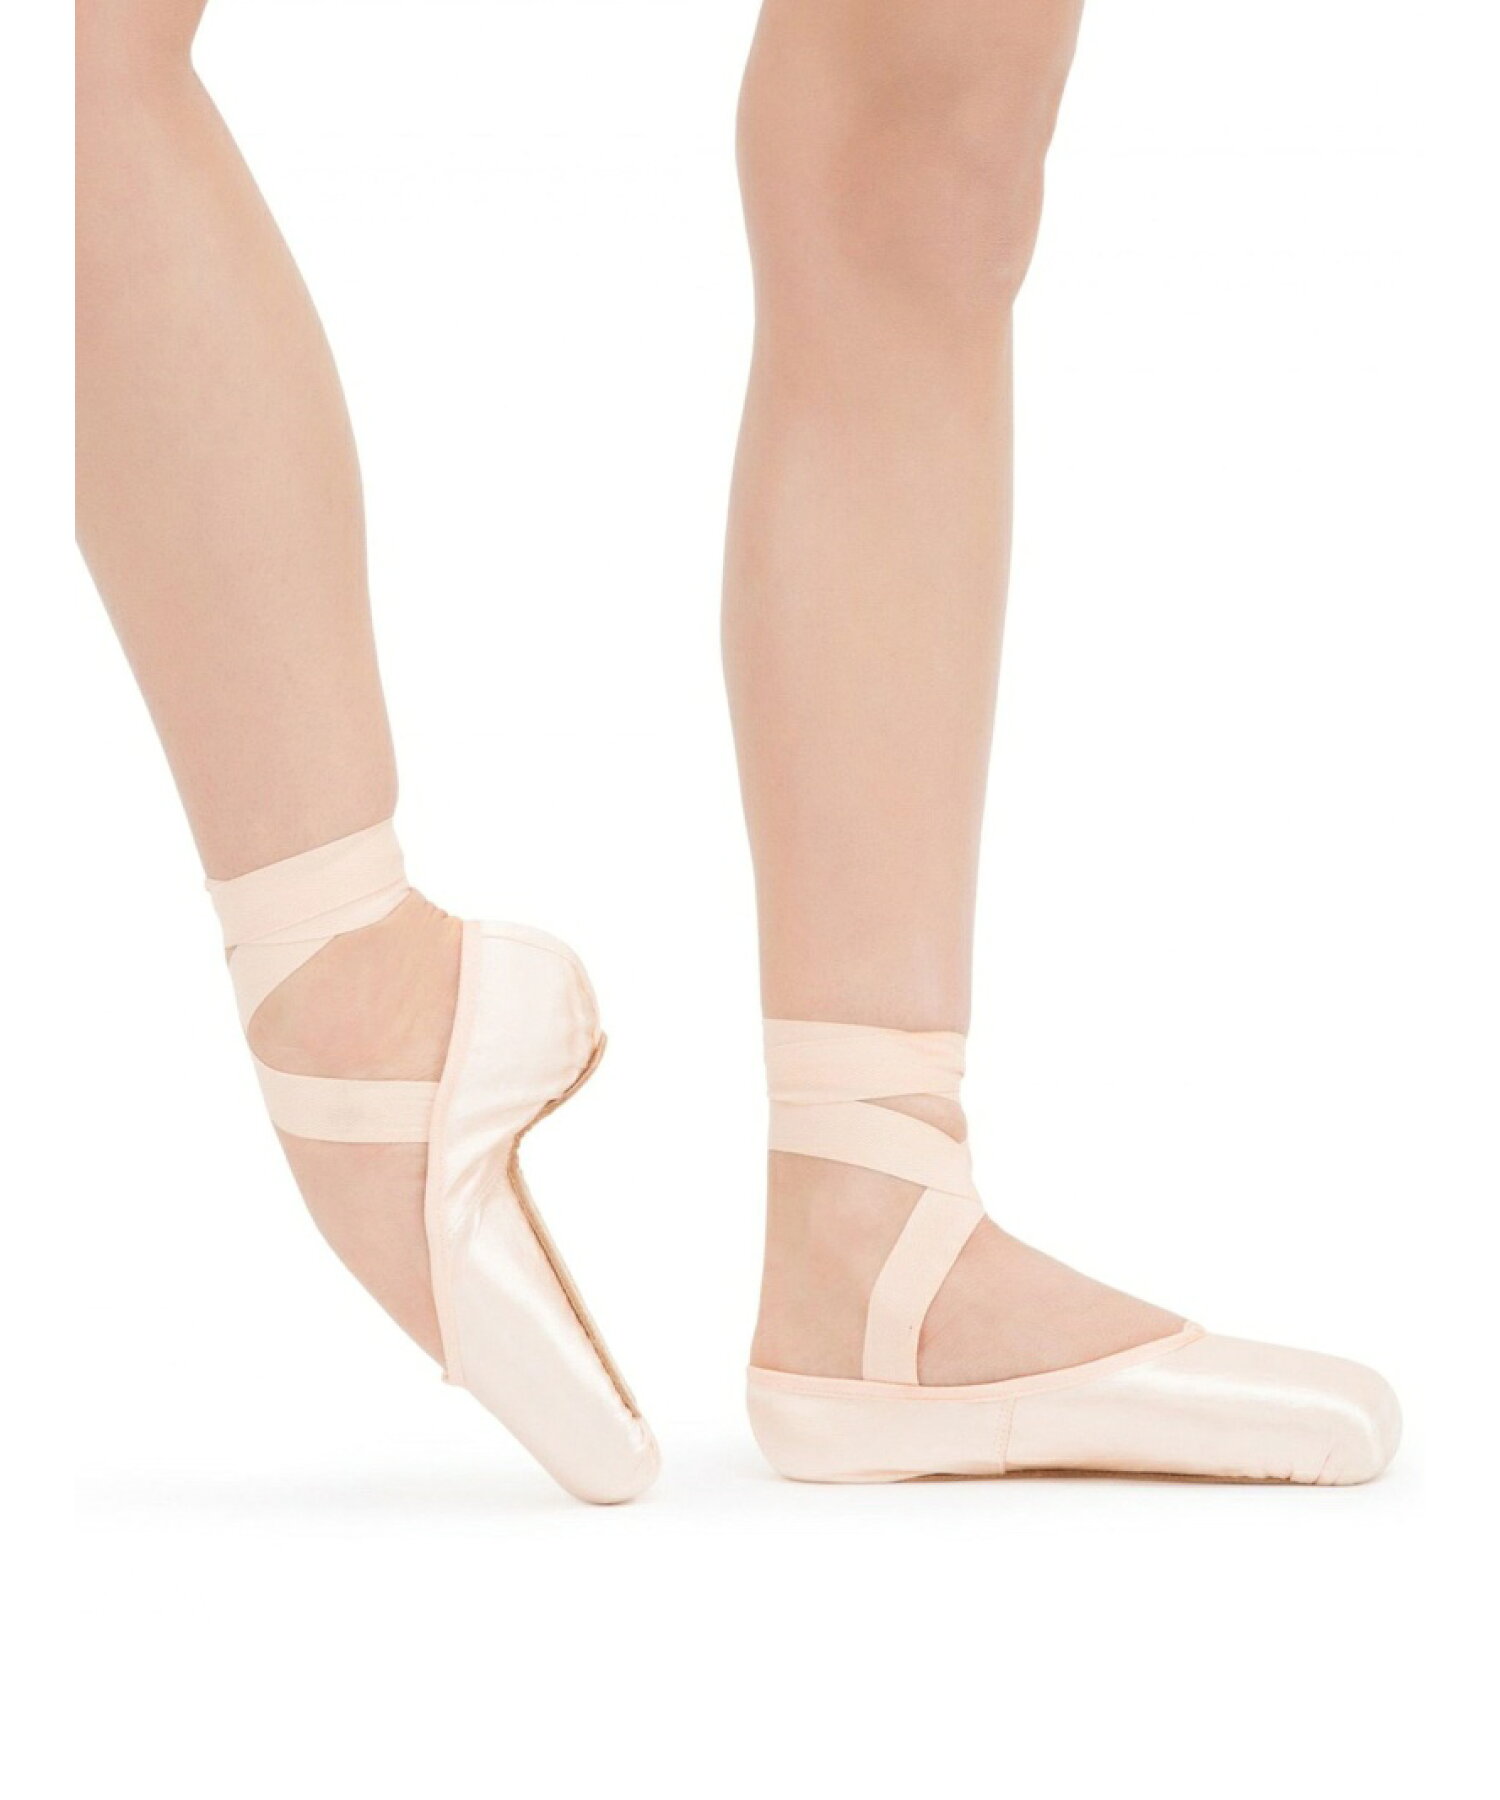 Alicia Pointe shoes - Large box Hard sole